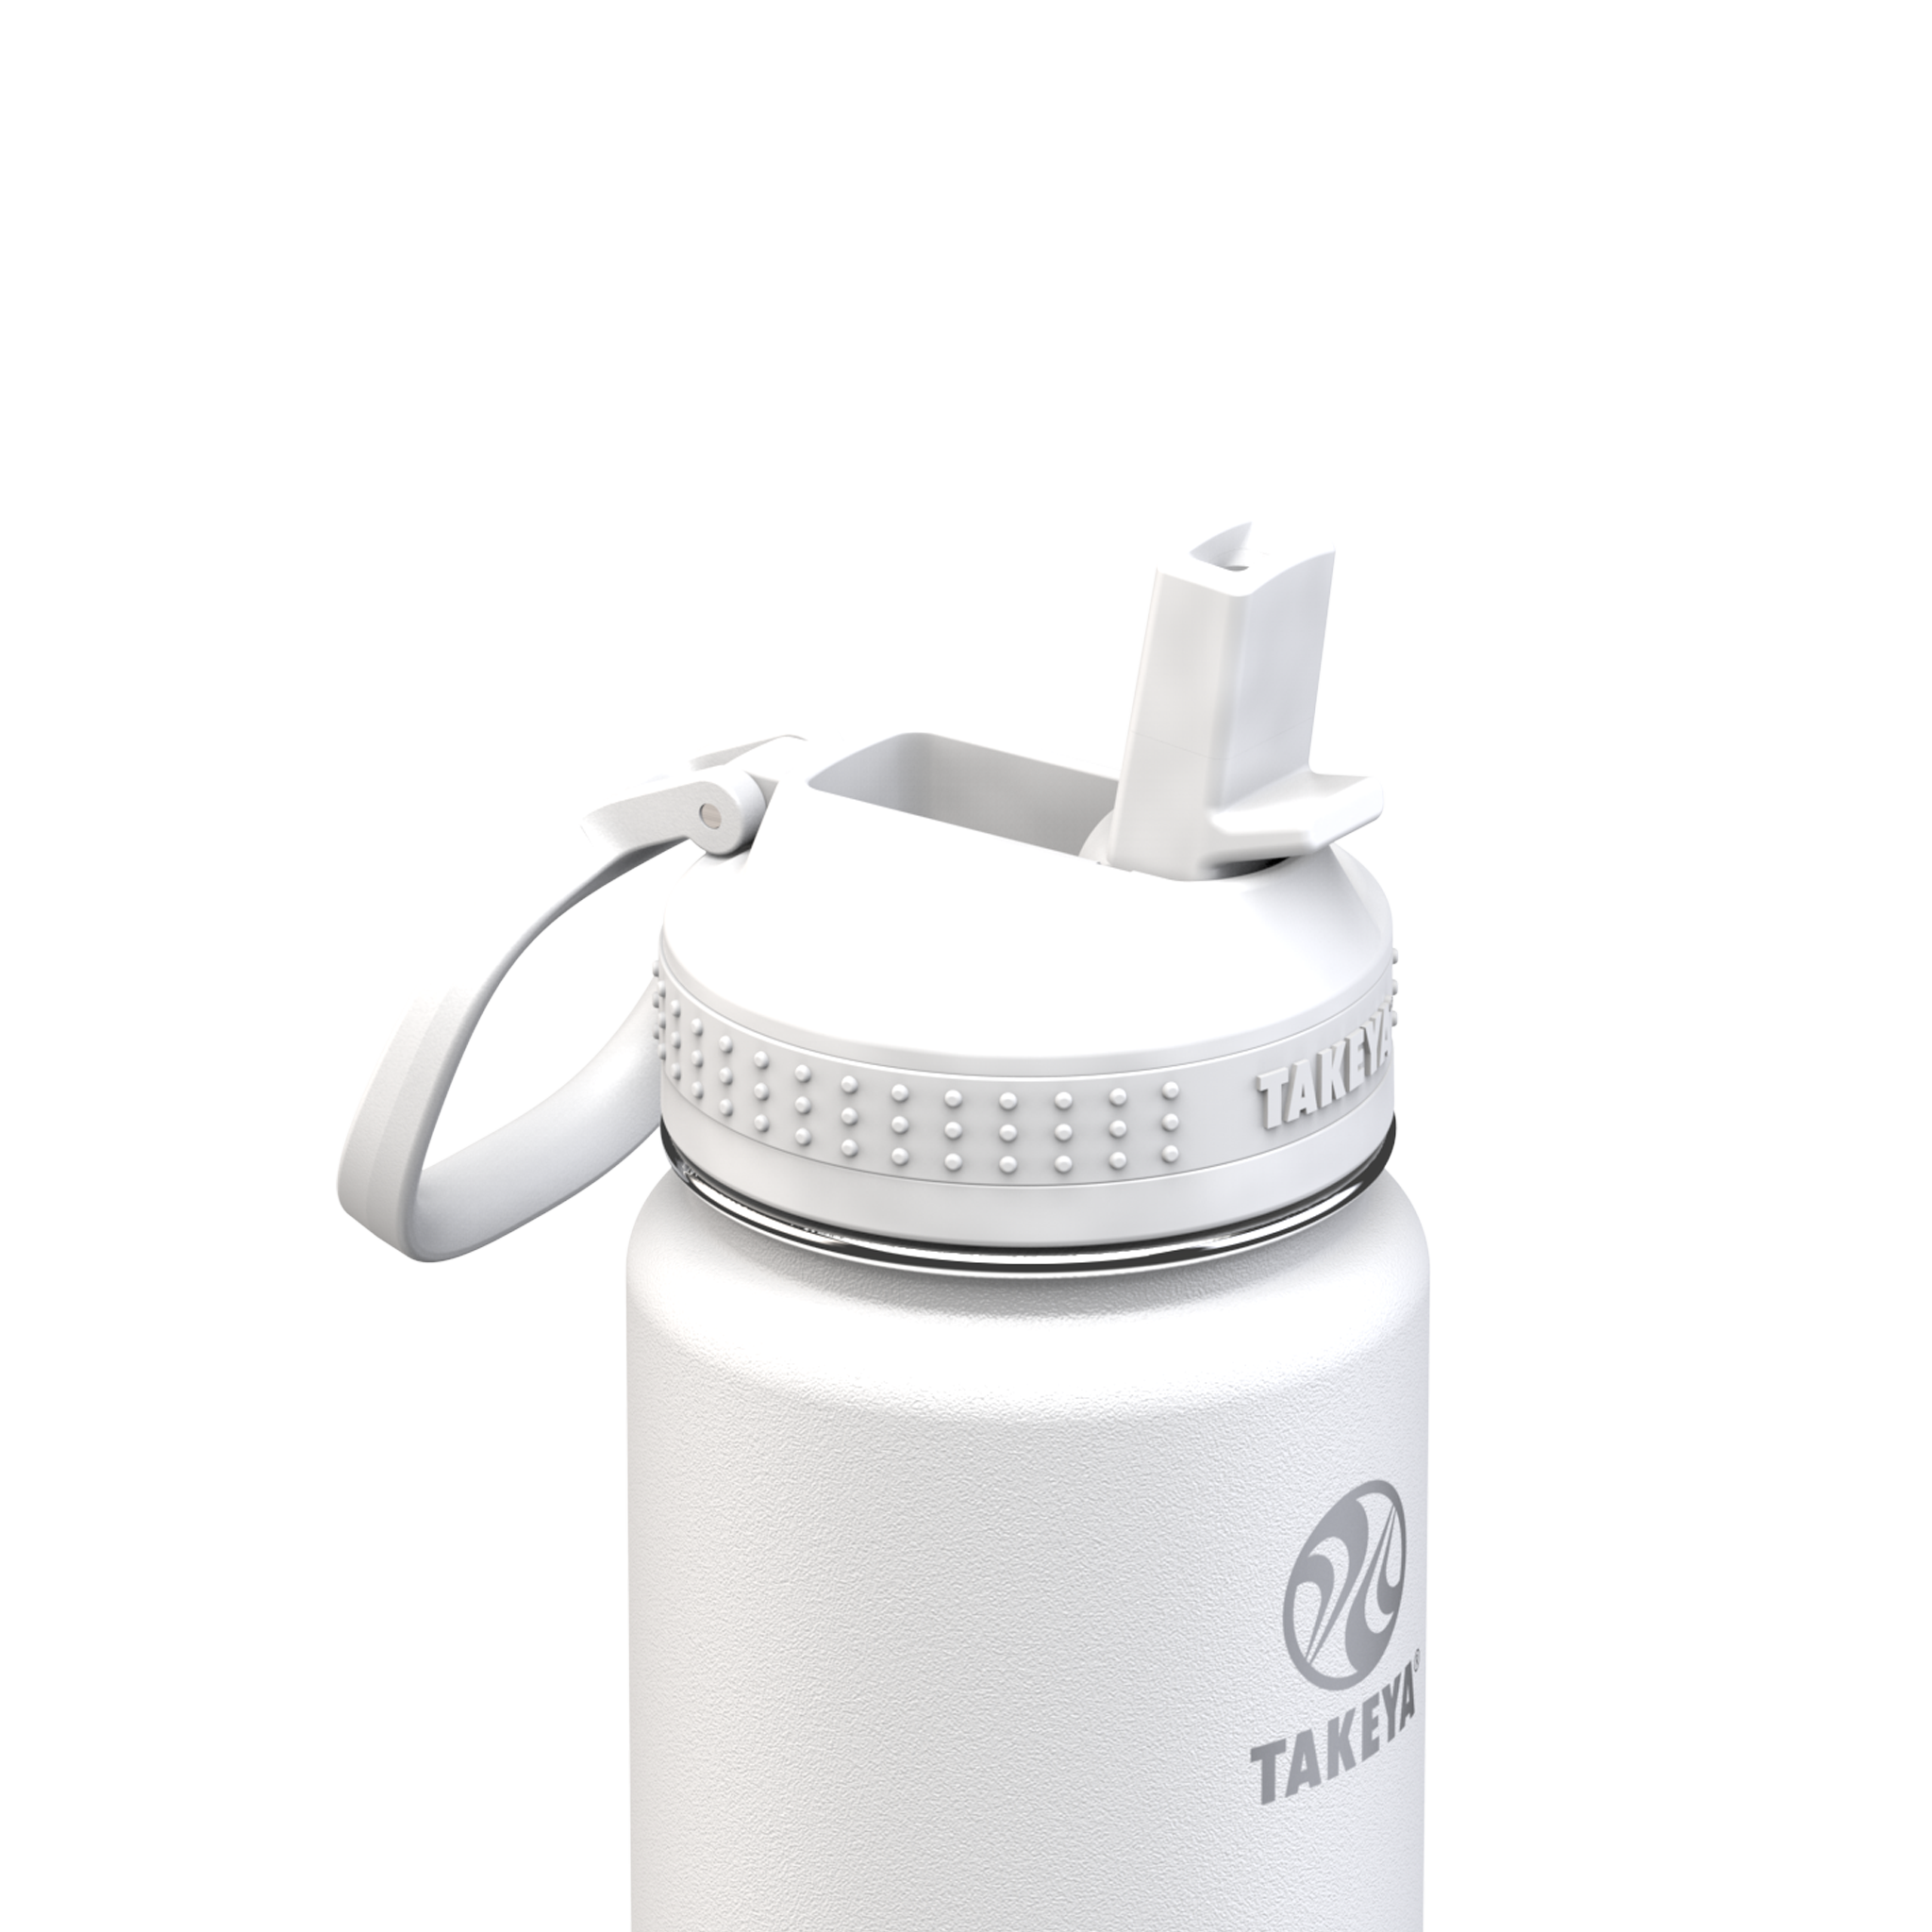 Takeya Actives Insulated Straw Lid 24 oz Water Bottle